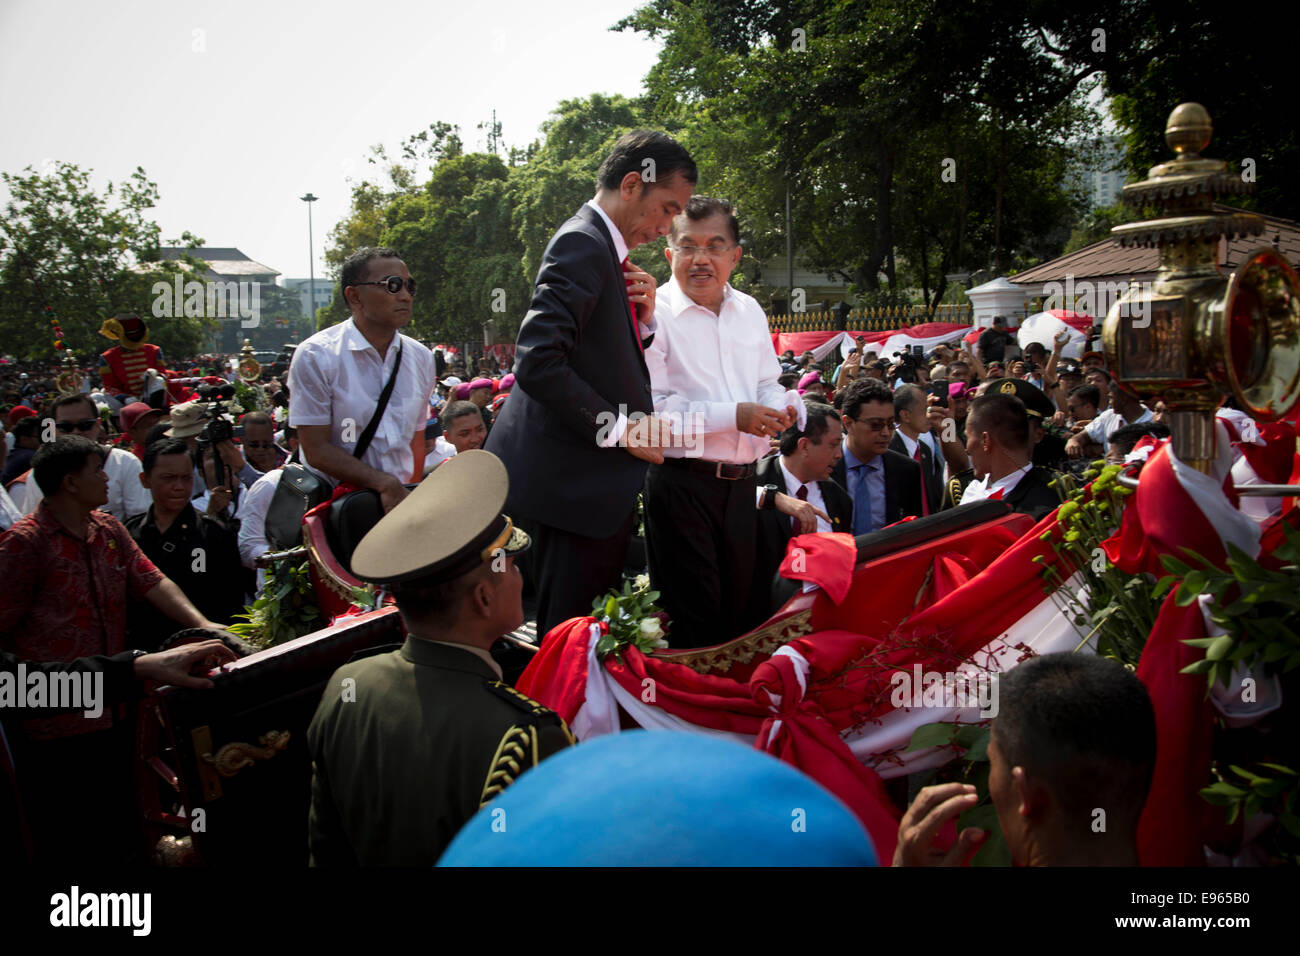 Jakarta, Indonesia. 20th Oct, 2014. Jokowi check on his tie before entering the palace. Jokowi inauguration celebration held arround Hotel Indonesia roundabout to Indonesian Palace as the new president riding Indonesian traditional horse-drawn carriage called 'Kereta Kencana'. Credit:  Donal Husni/Alamy Live News Stock Photo